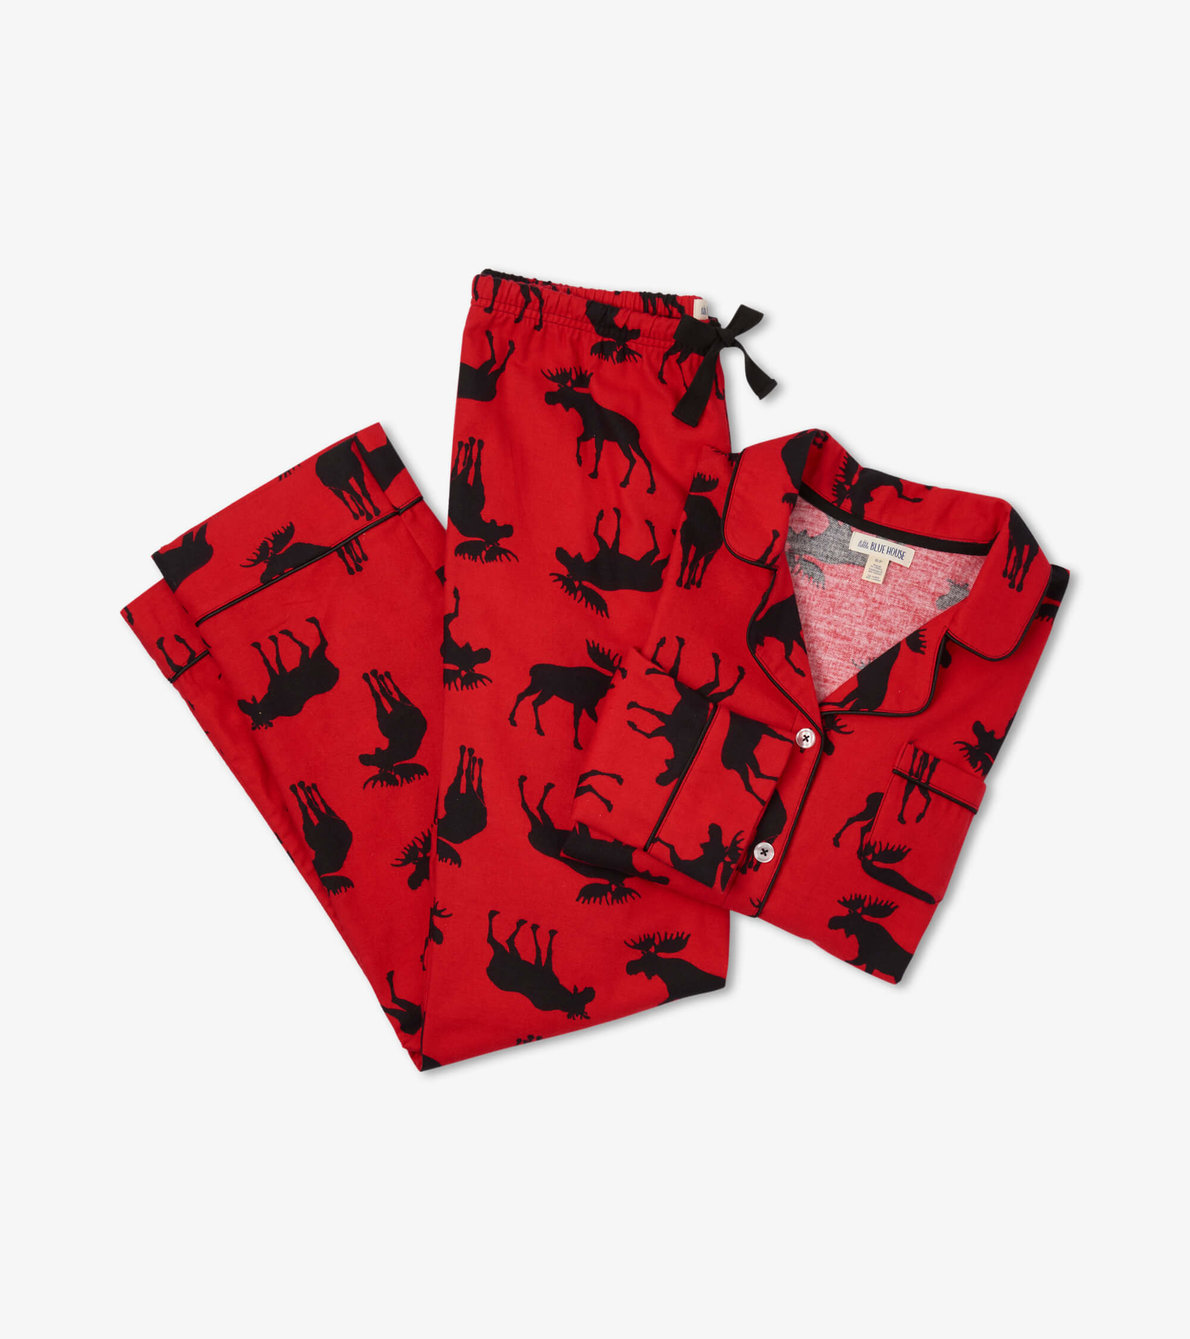 View larger image of Women's Moose On Red Flannel Pajama Set